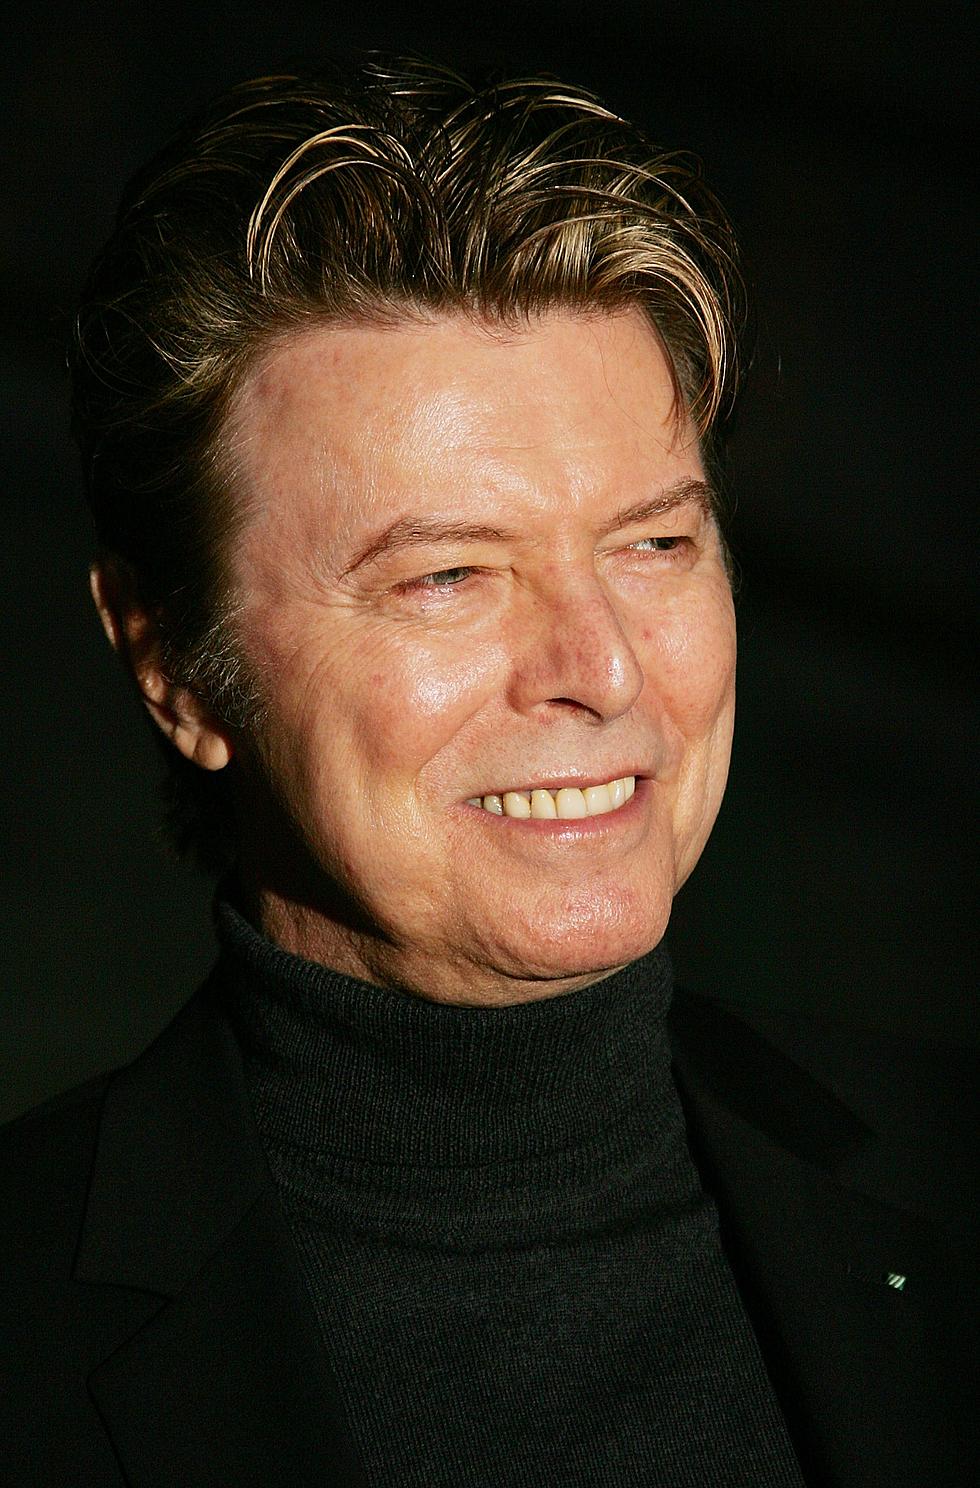 Bowie’s $100 Million Estate to be Divided